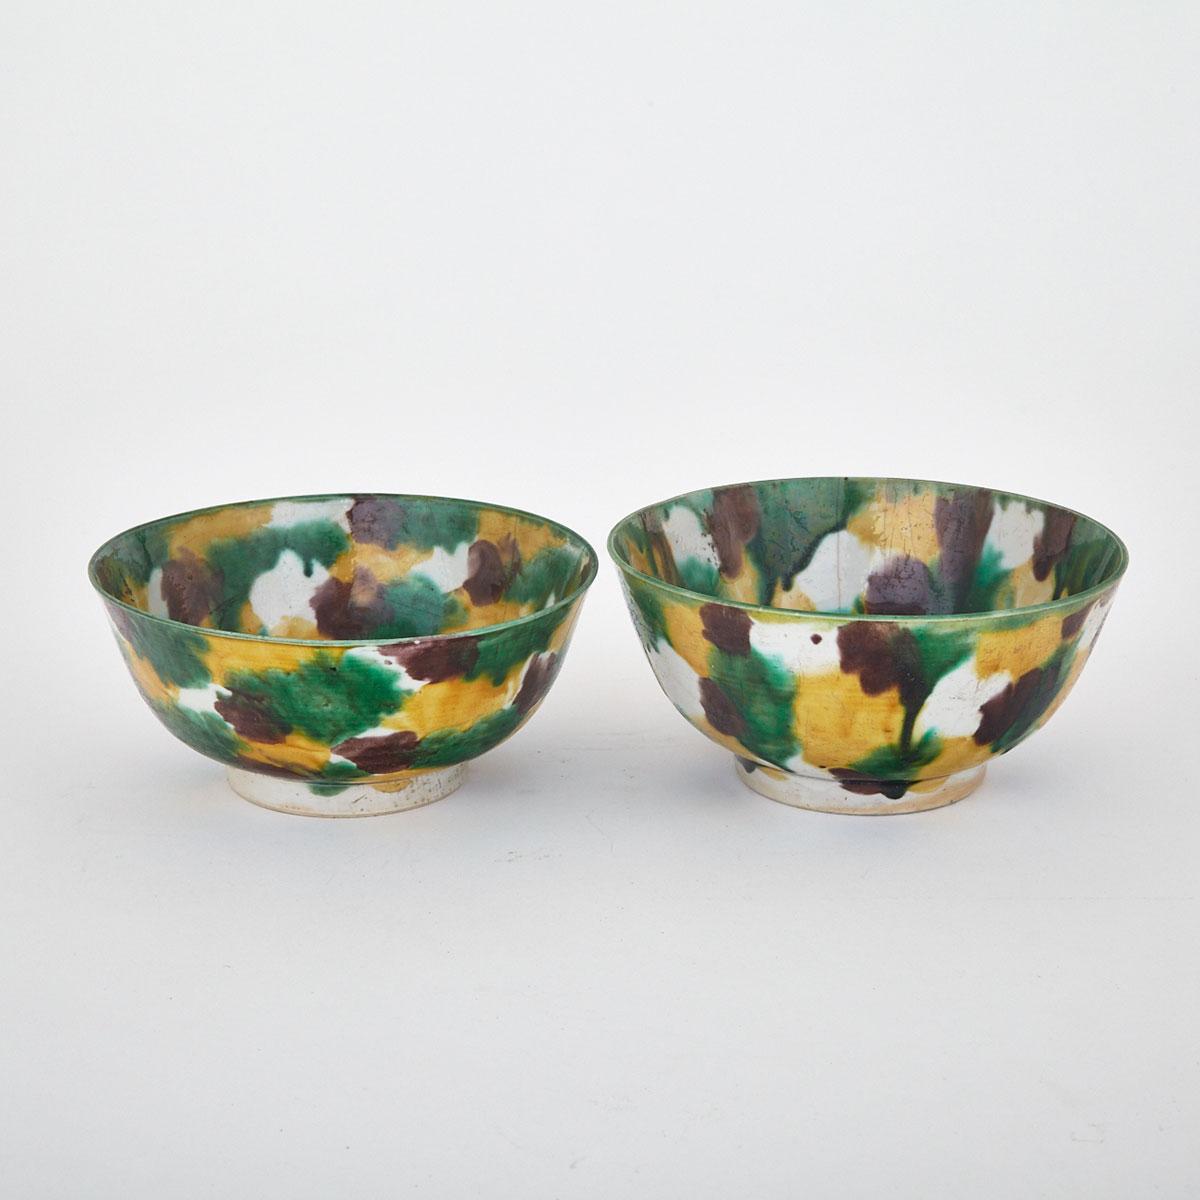 Pair of ‘Egg Yolk and Spinach’ Bowls, 17th Century